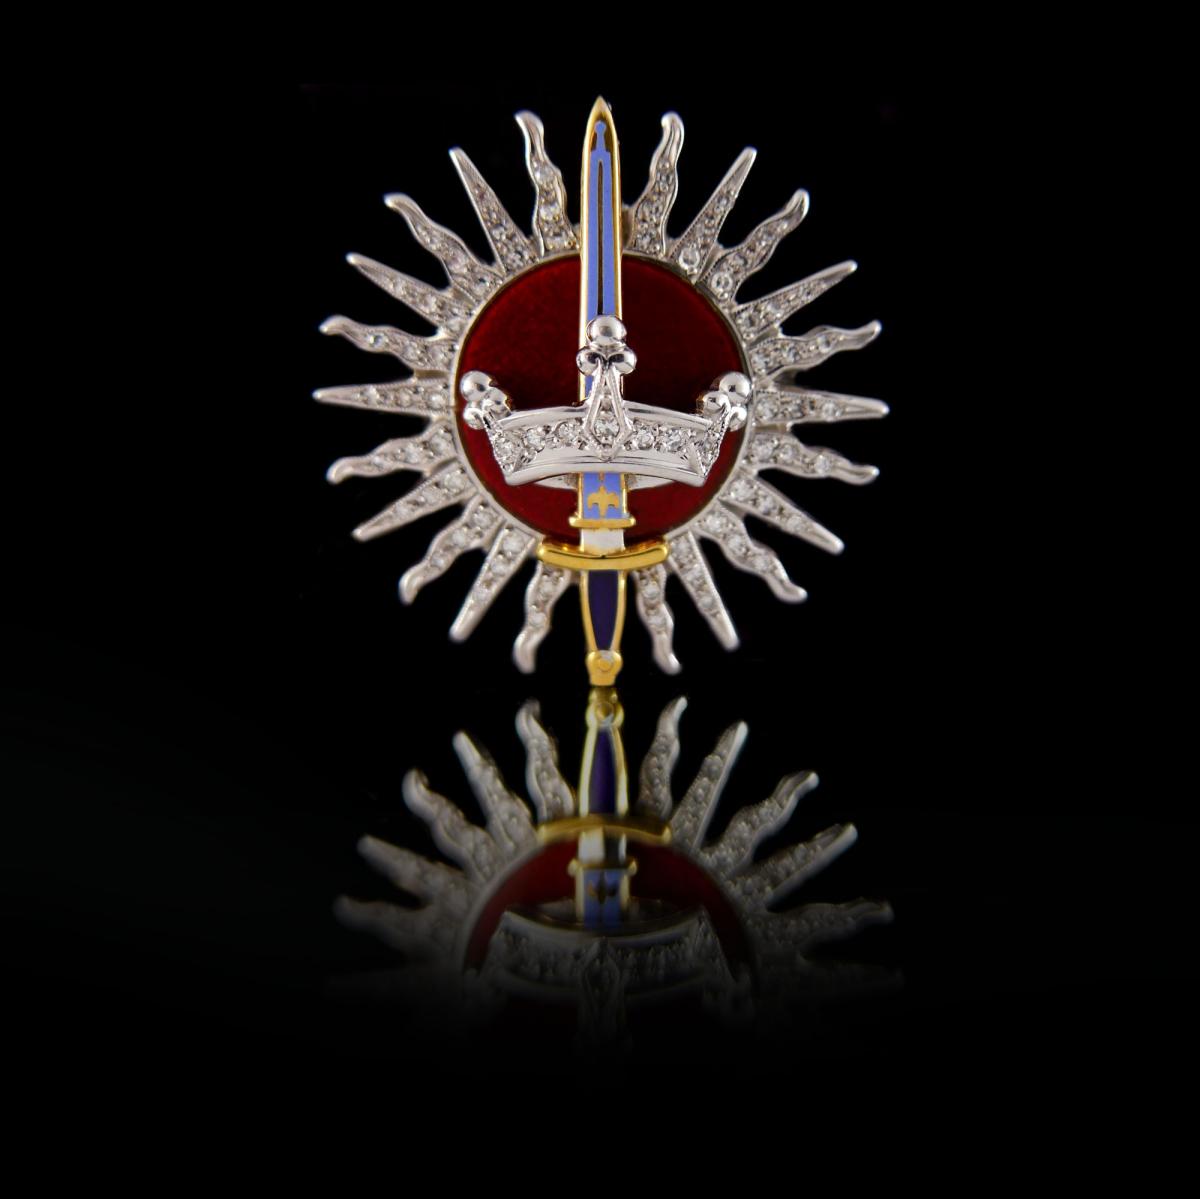 Imperial Society of Knights Bachelor Brooch